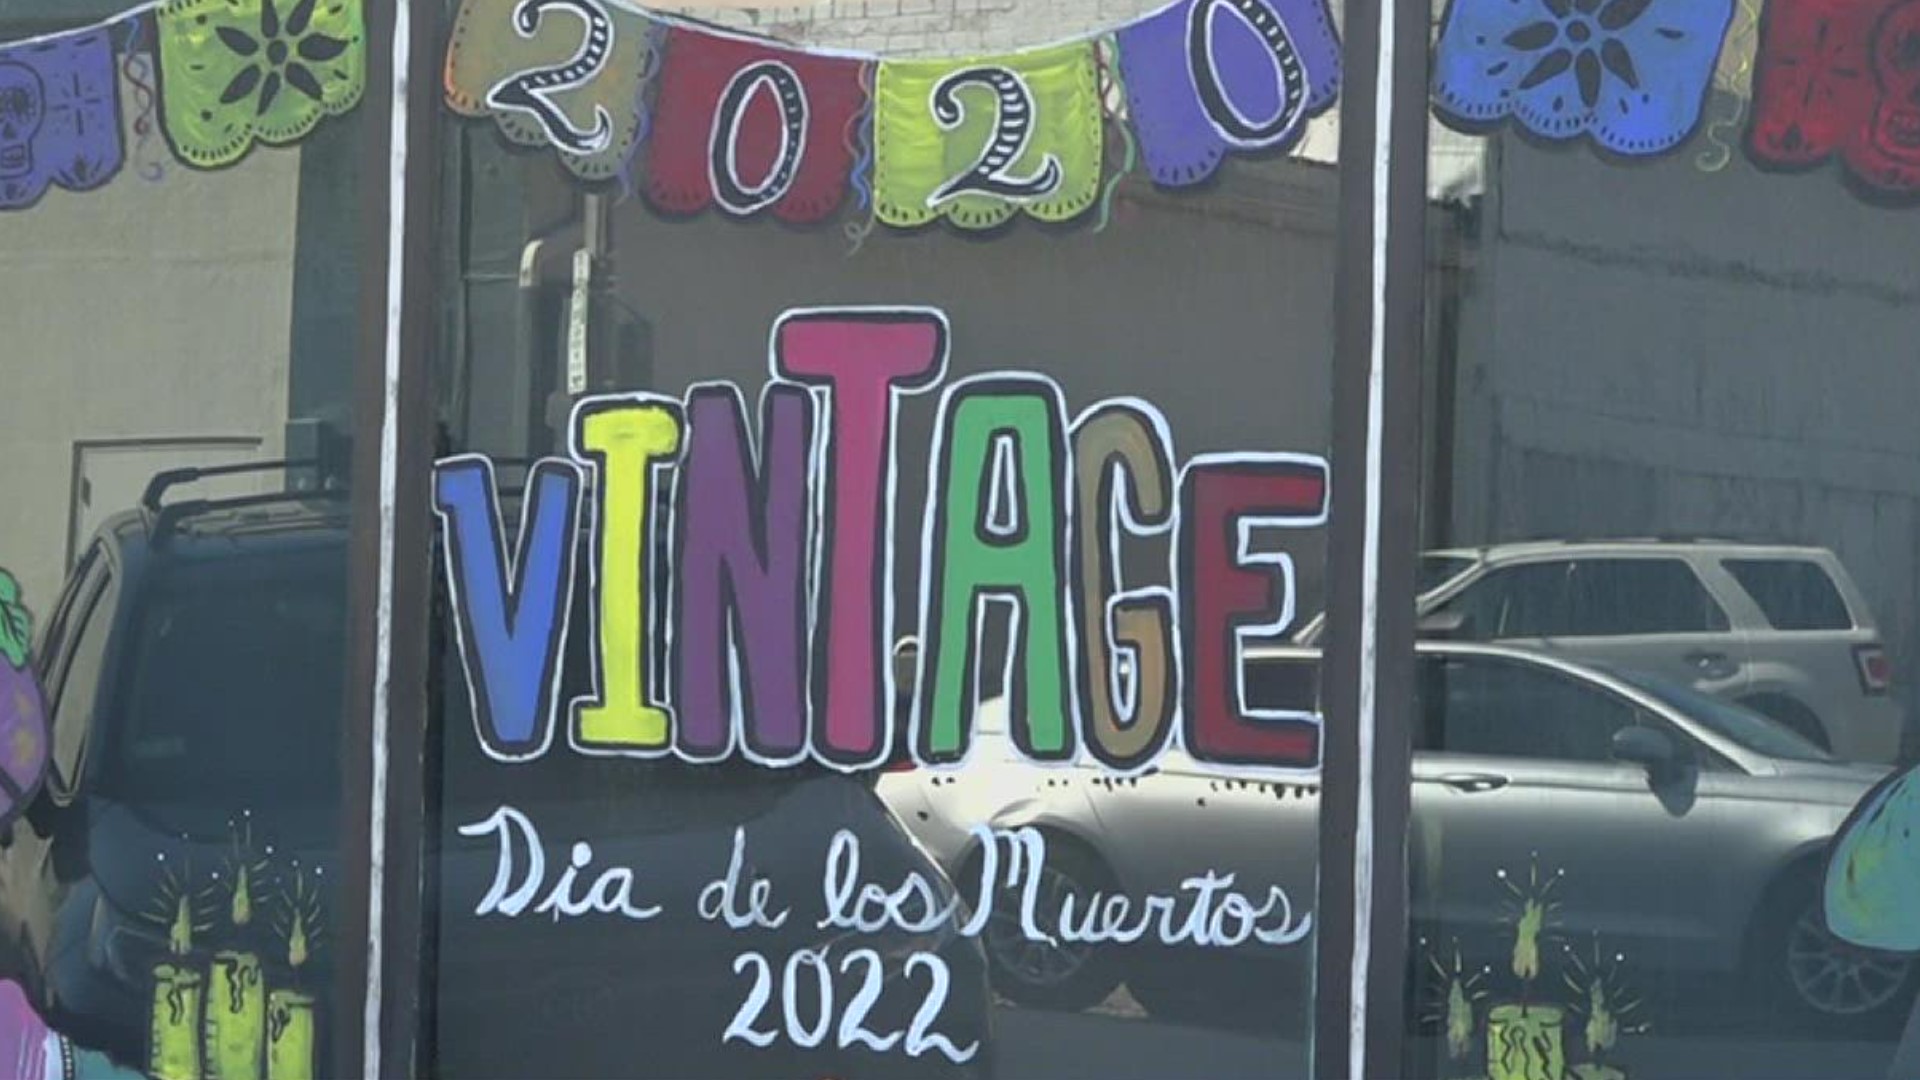 After a two-year hiatus, the annual festival returns to Downtown Corpus Christi. Businesses in the area are ready to welcome back visitors.